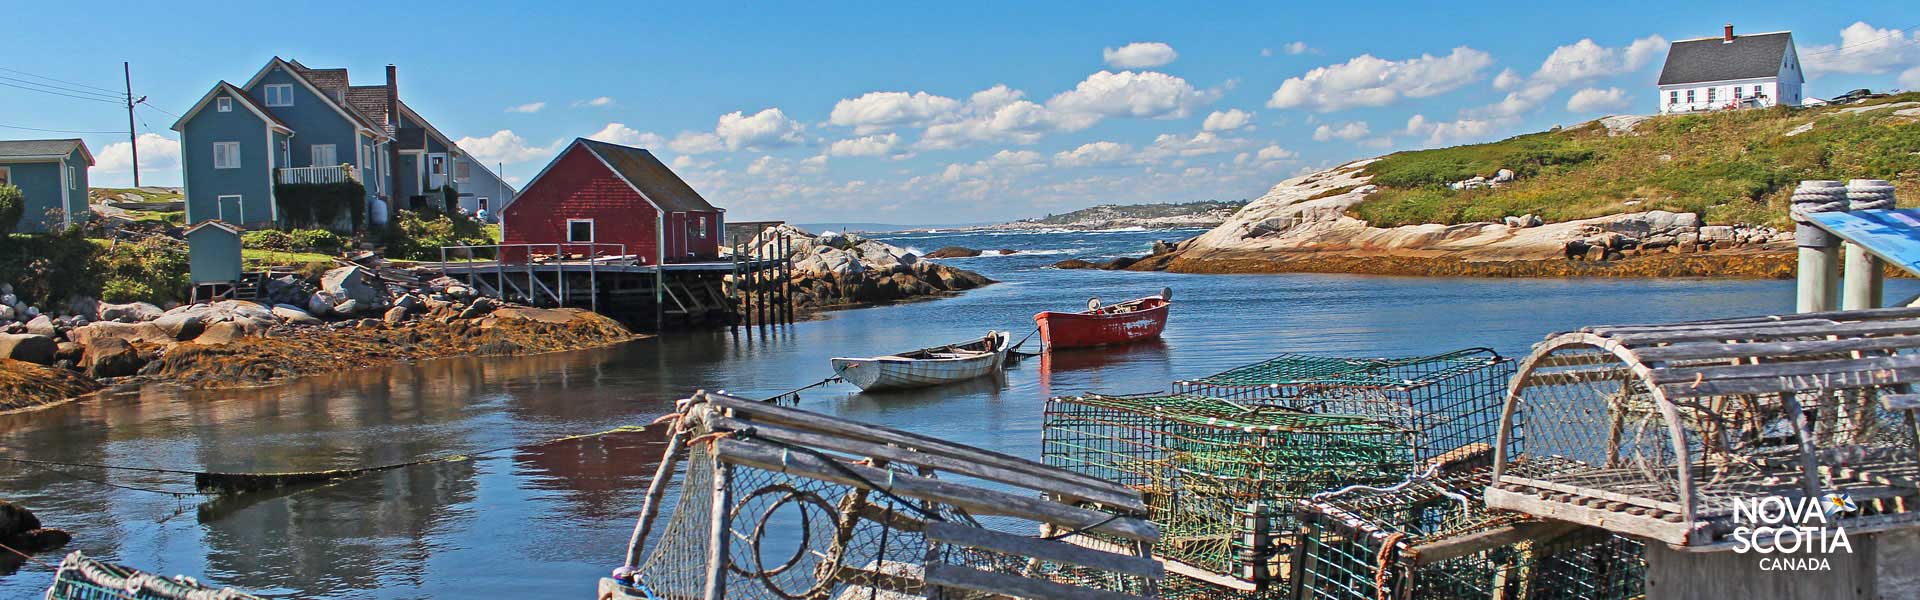 Nova Scotia Vacation Packages 